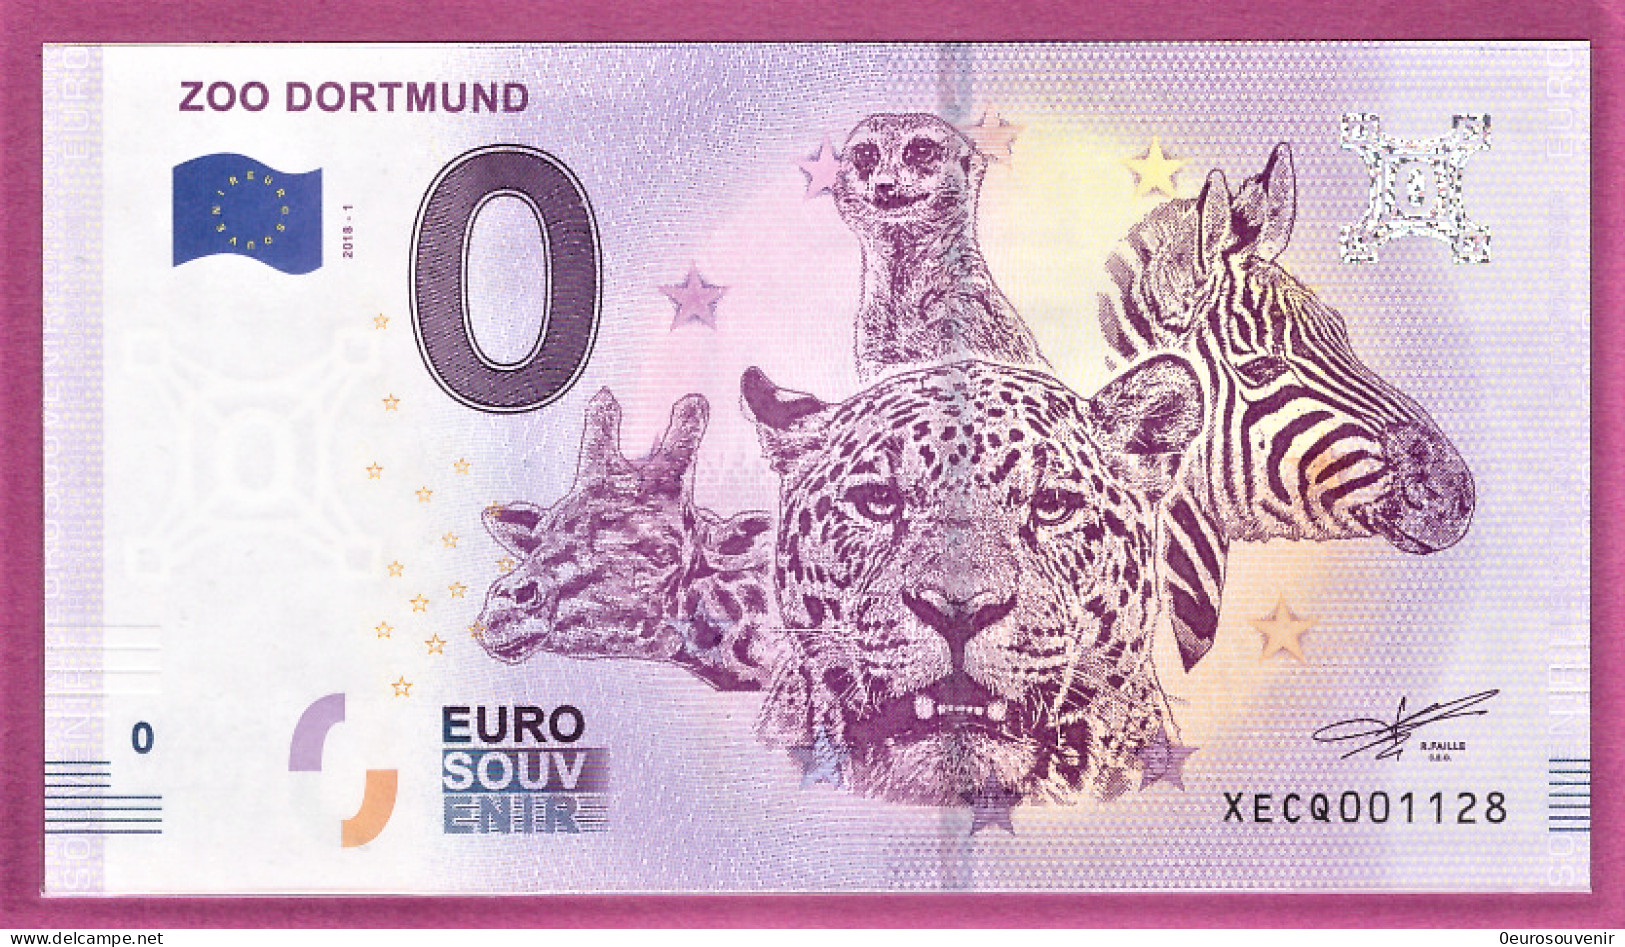 0-Euro XECQ 2018-1 ZOO DORTMUND - Private Proofs / Unofficial